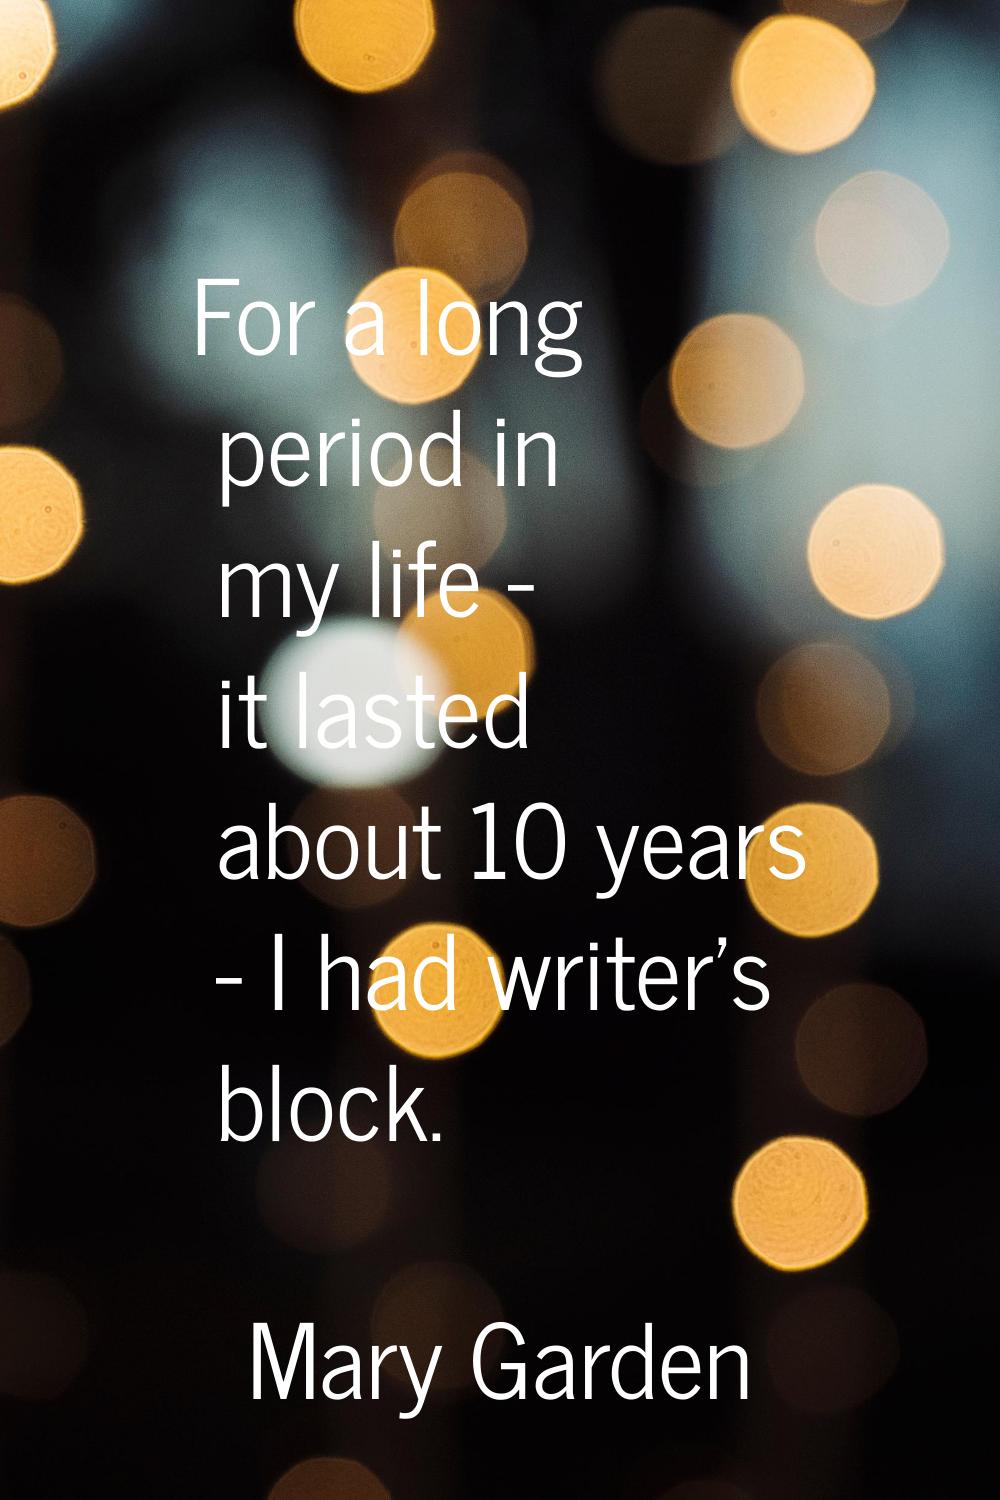 For a long period in my life - it lasted about 10 years - I had writer's block.